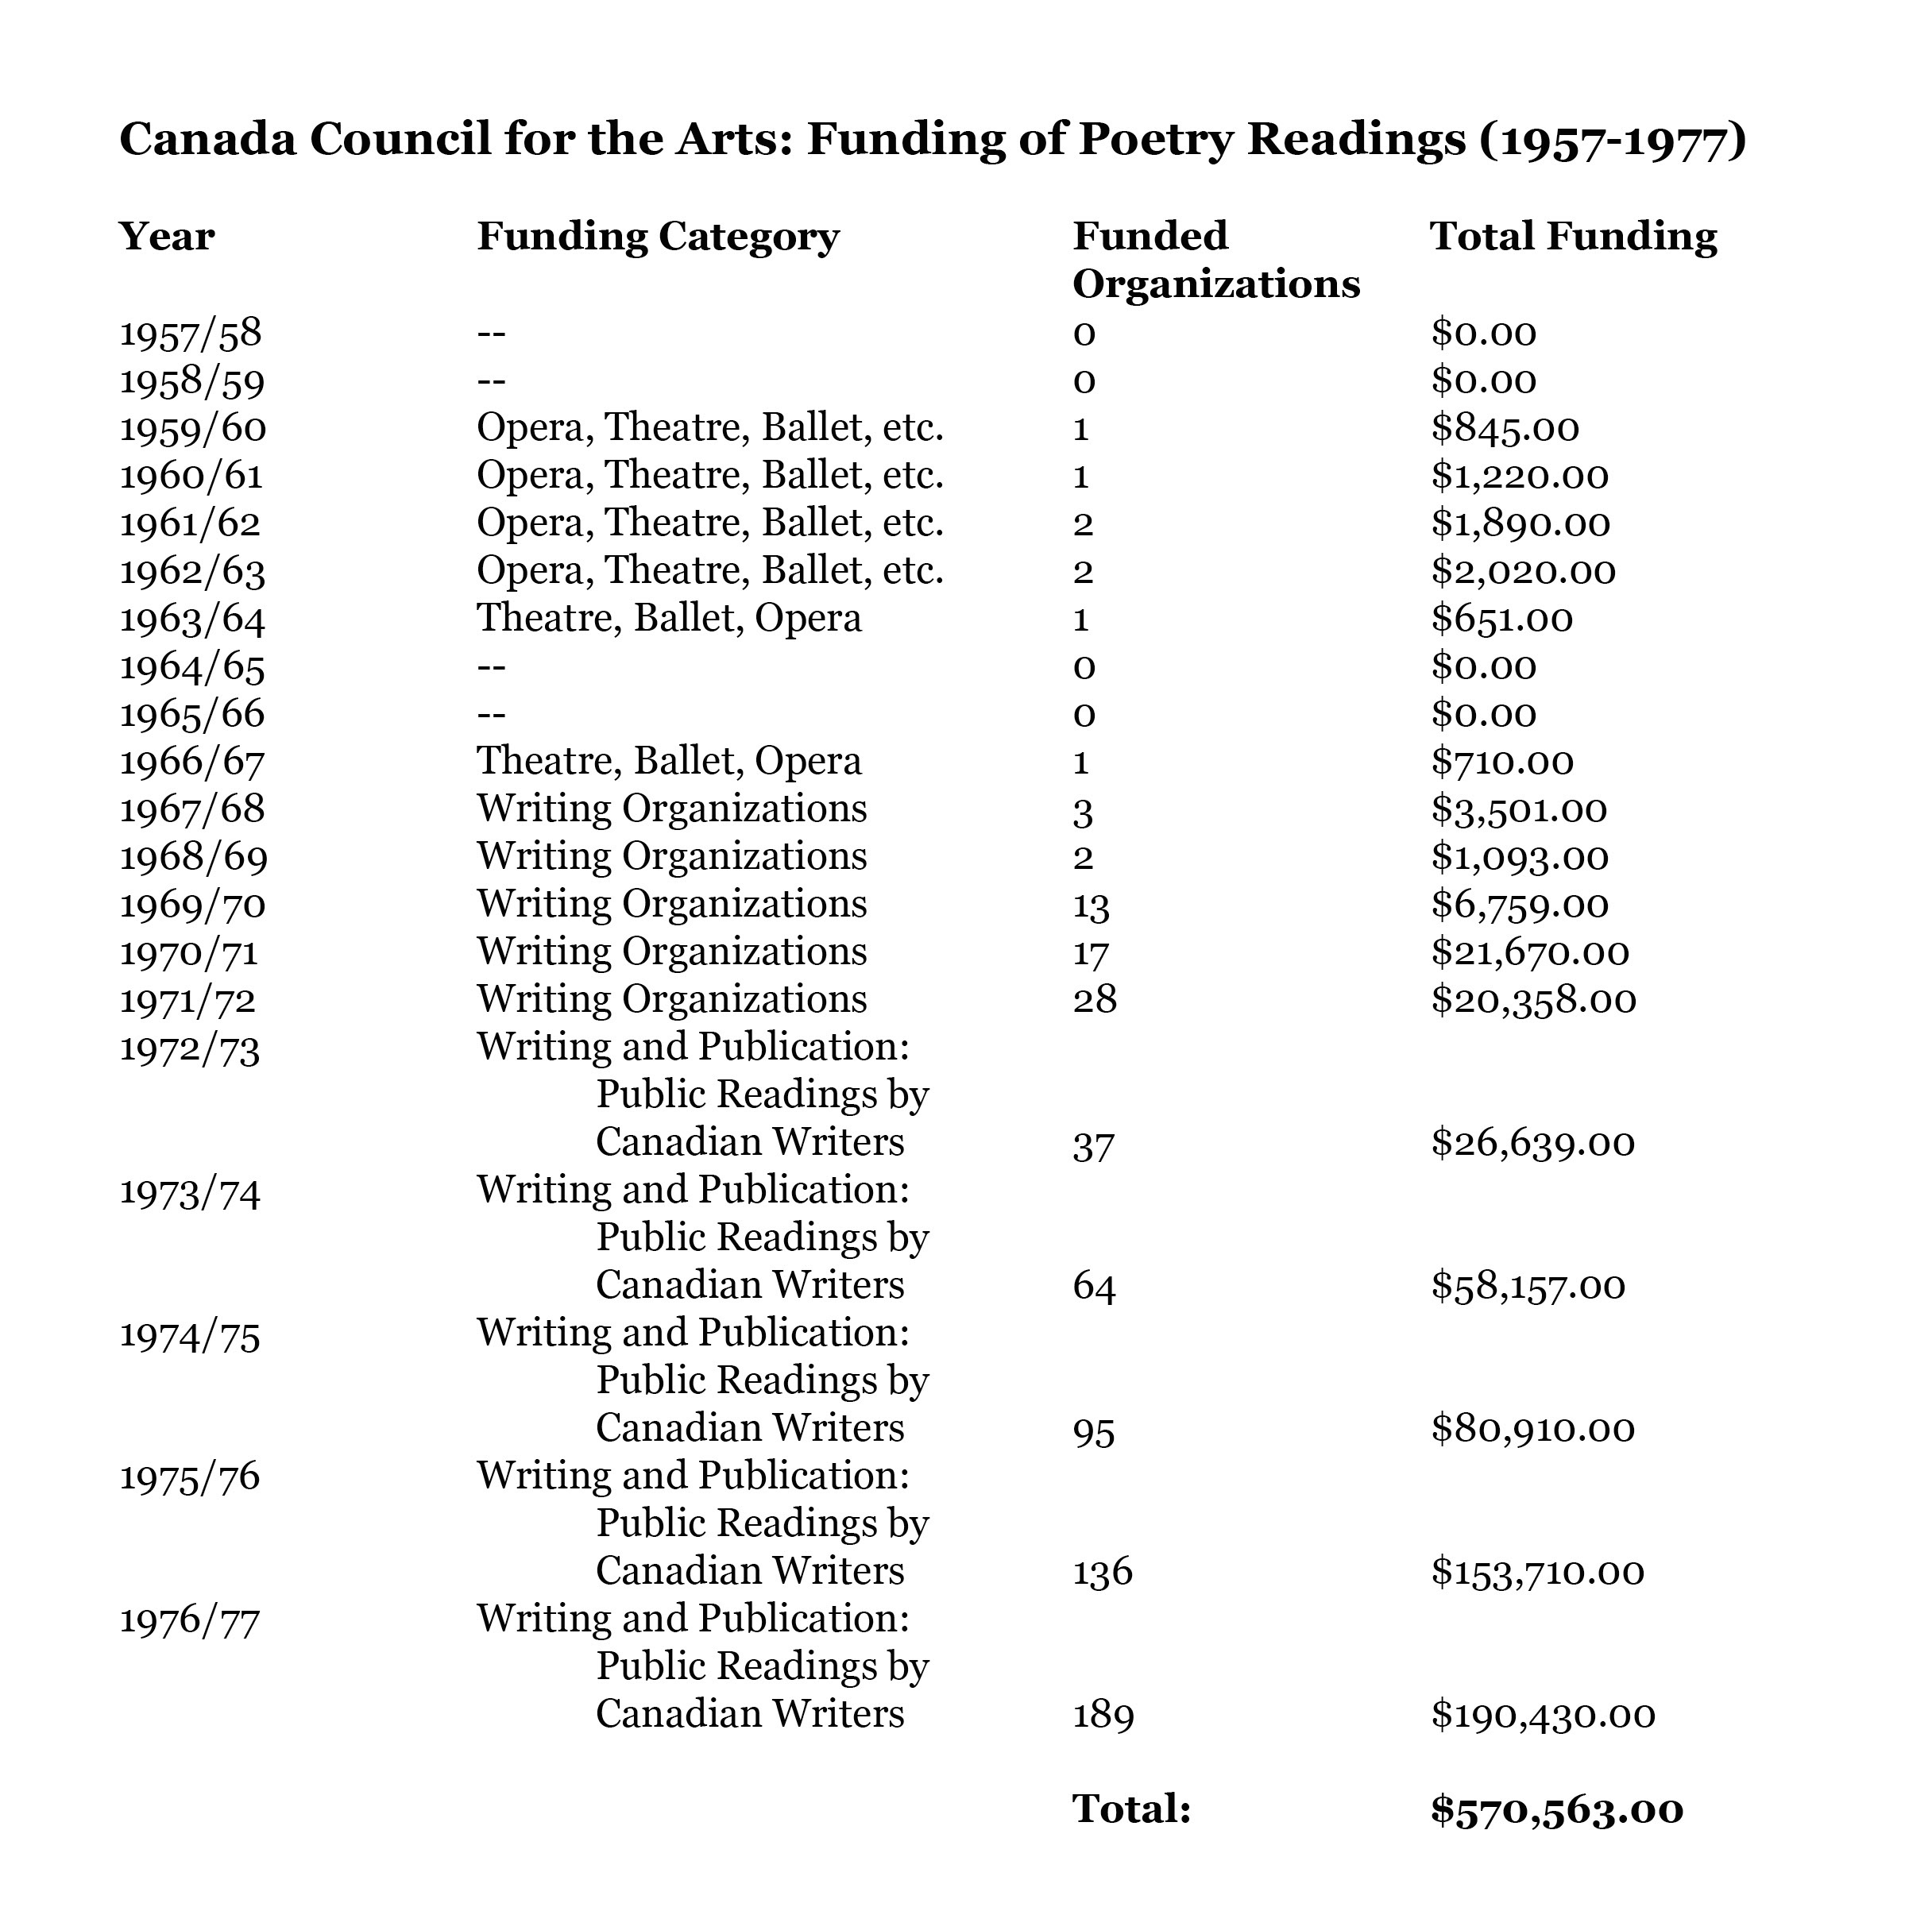 Canada Council Funding for Poetry Readings (1957-1977).